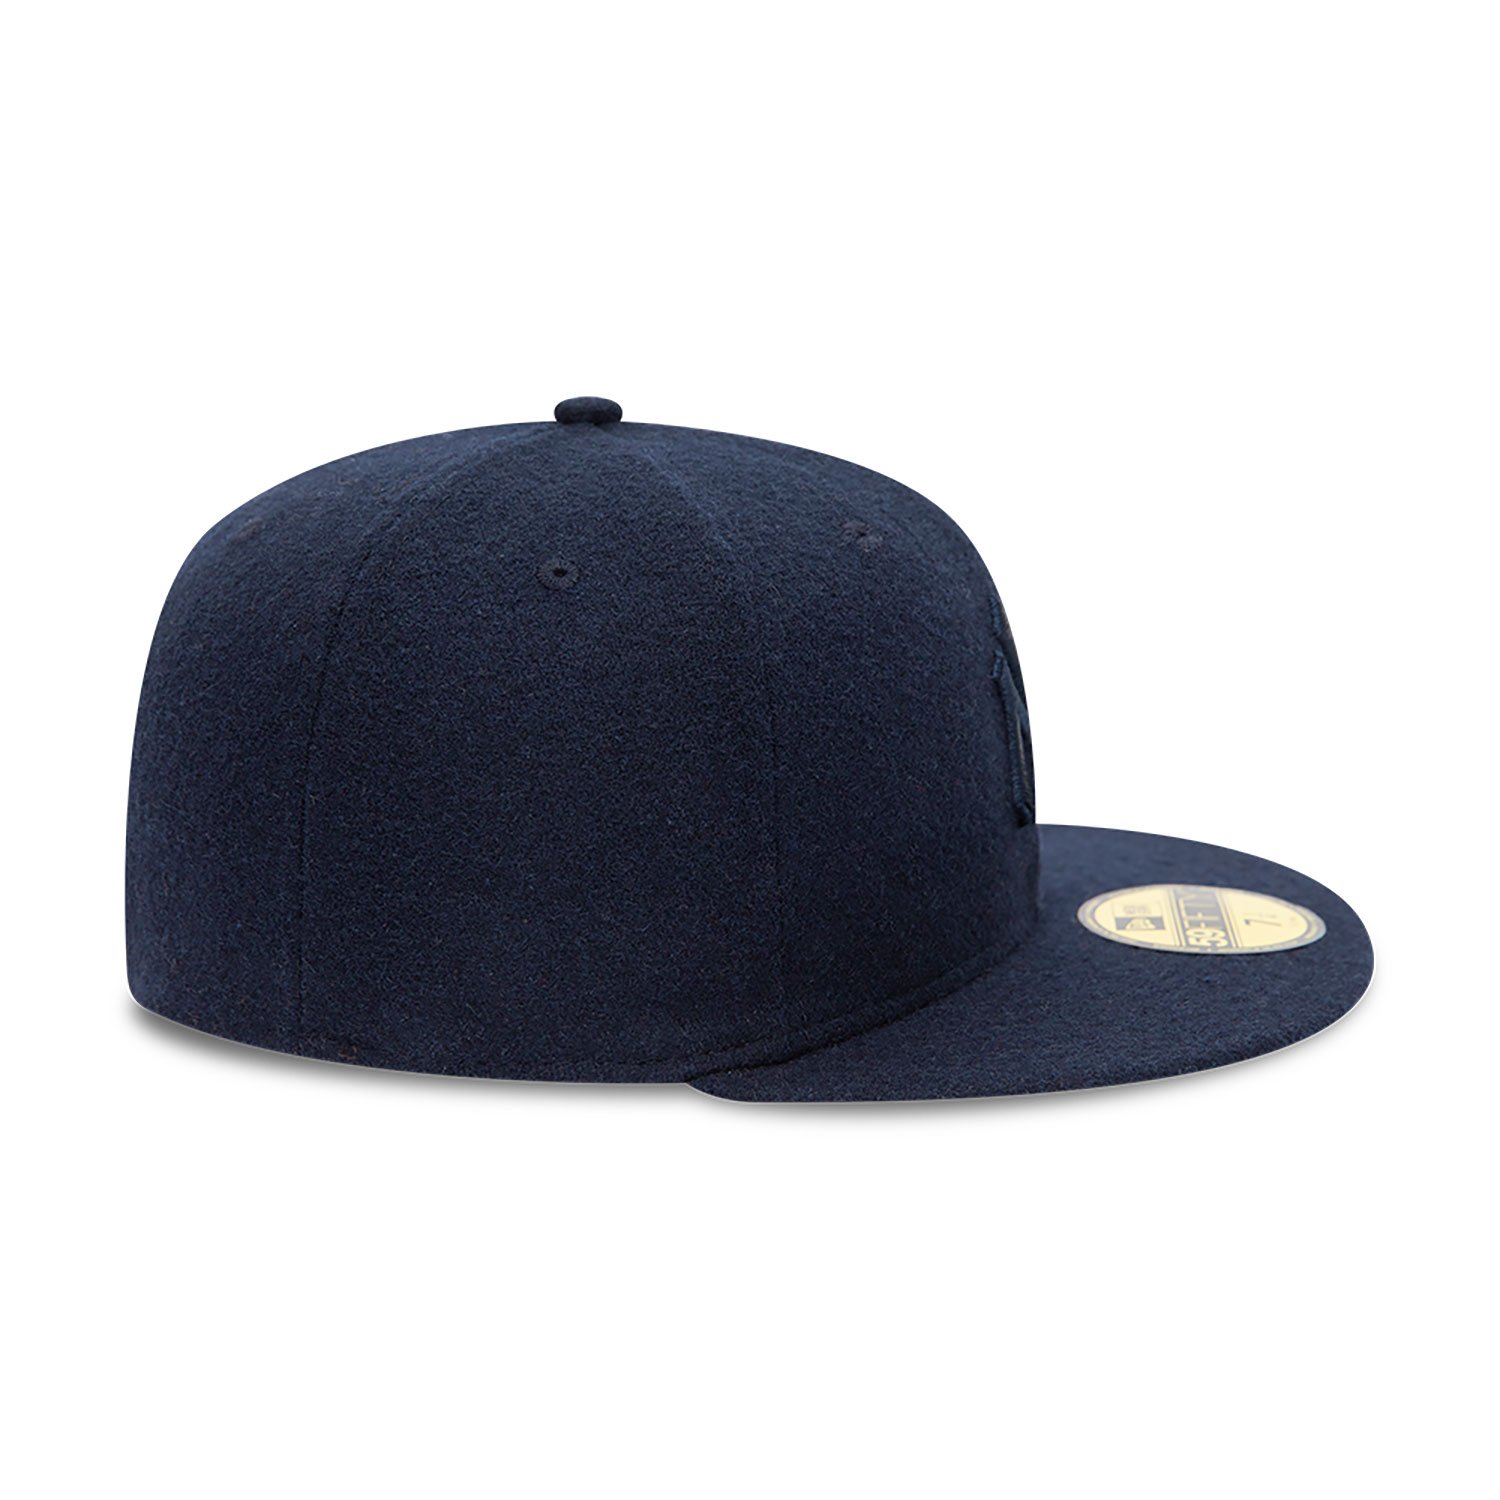 New York Yankees Melton Navy 59FIFTY Fitted Cap